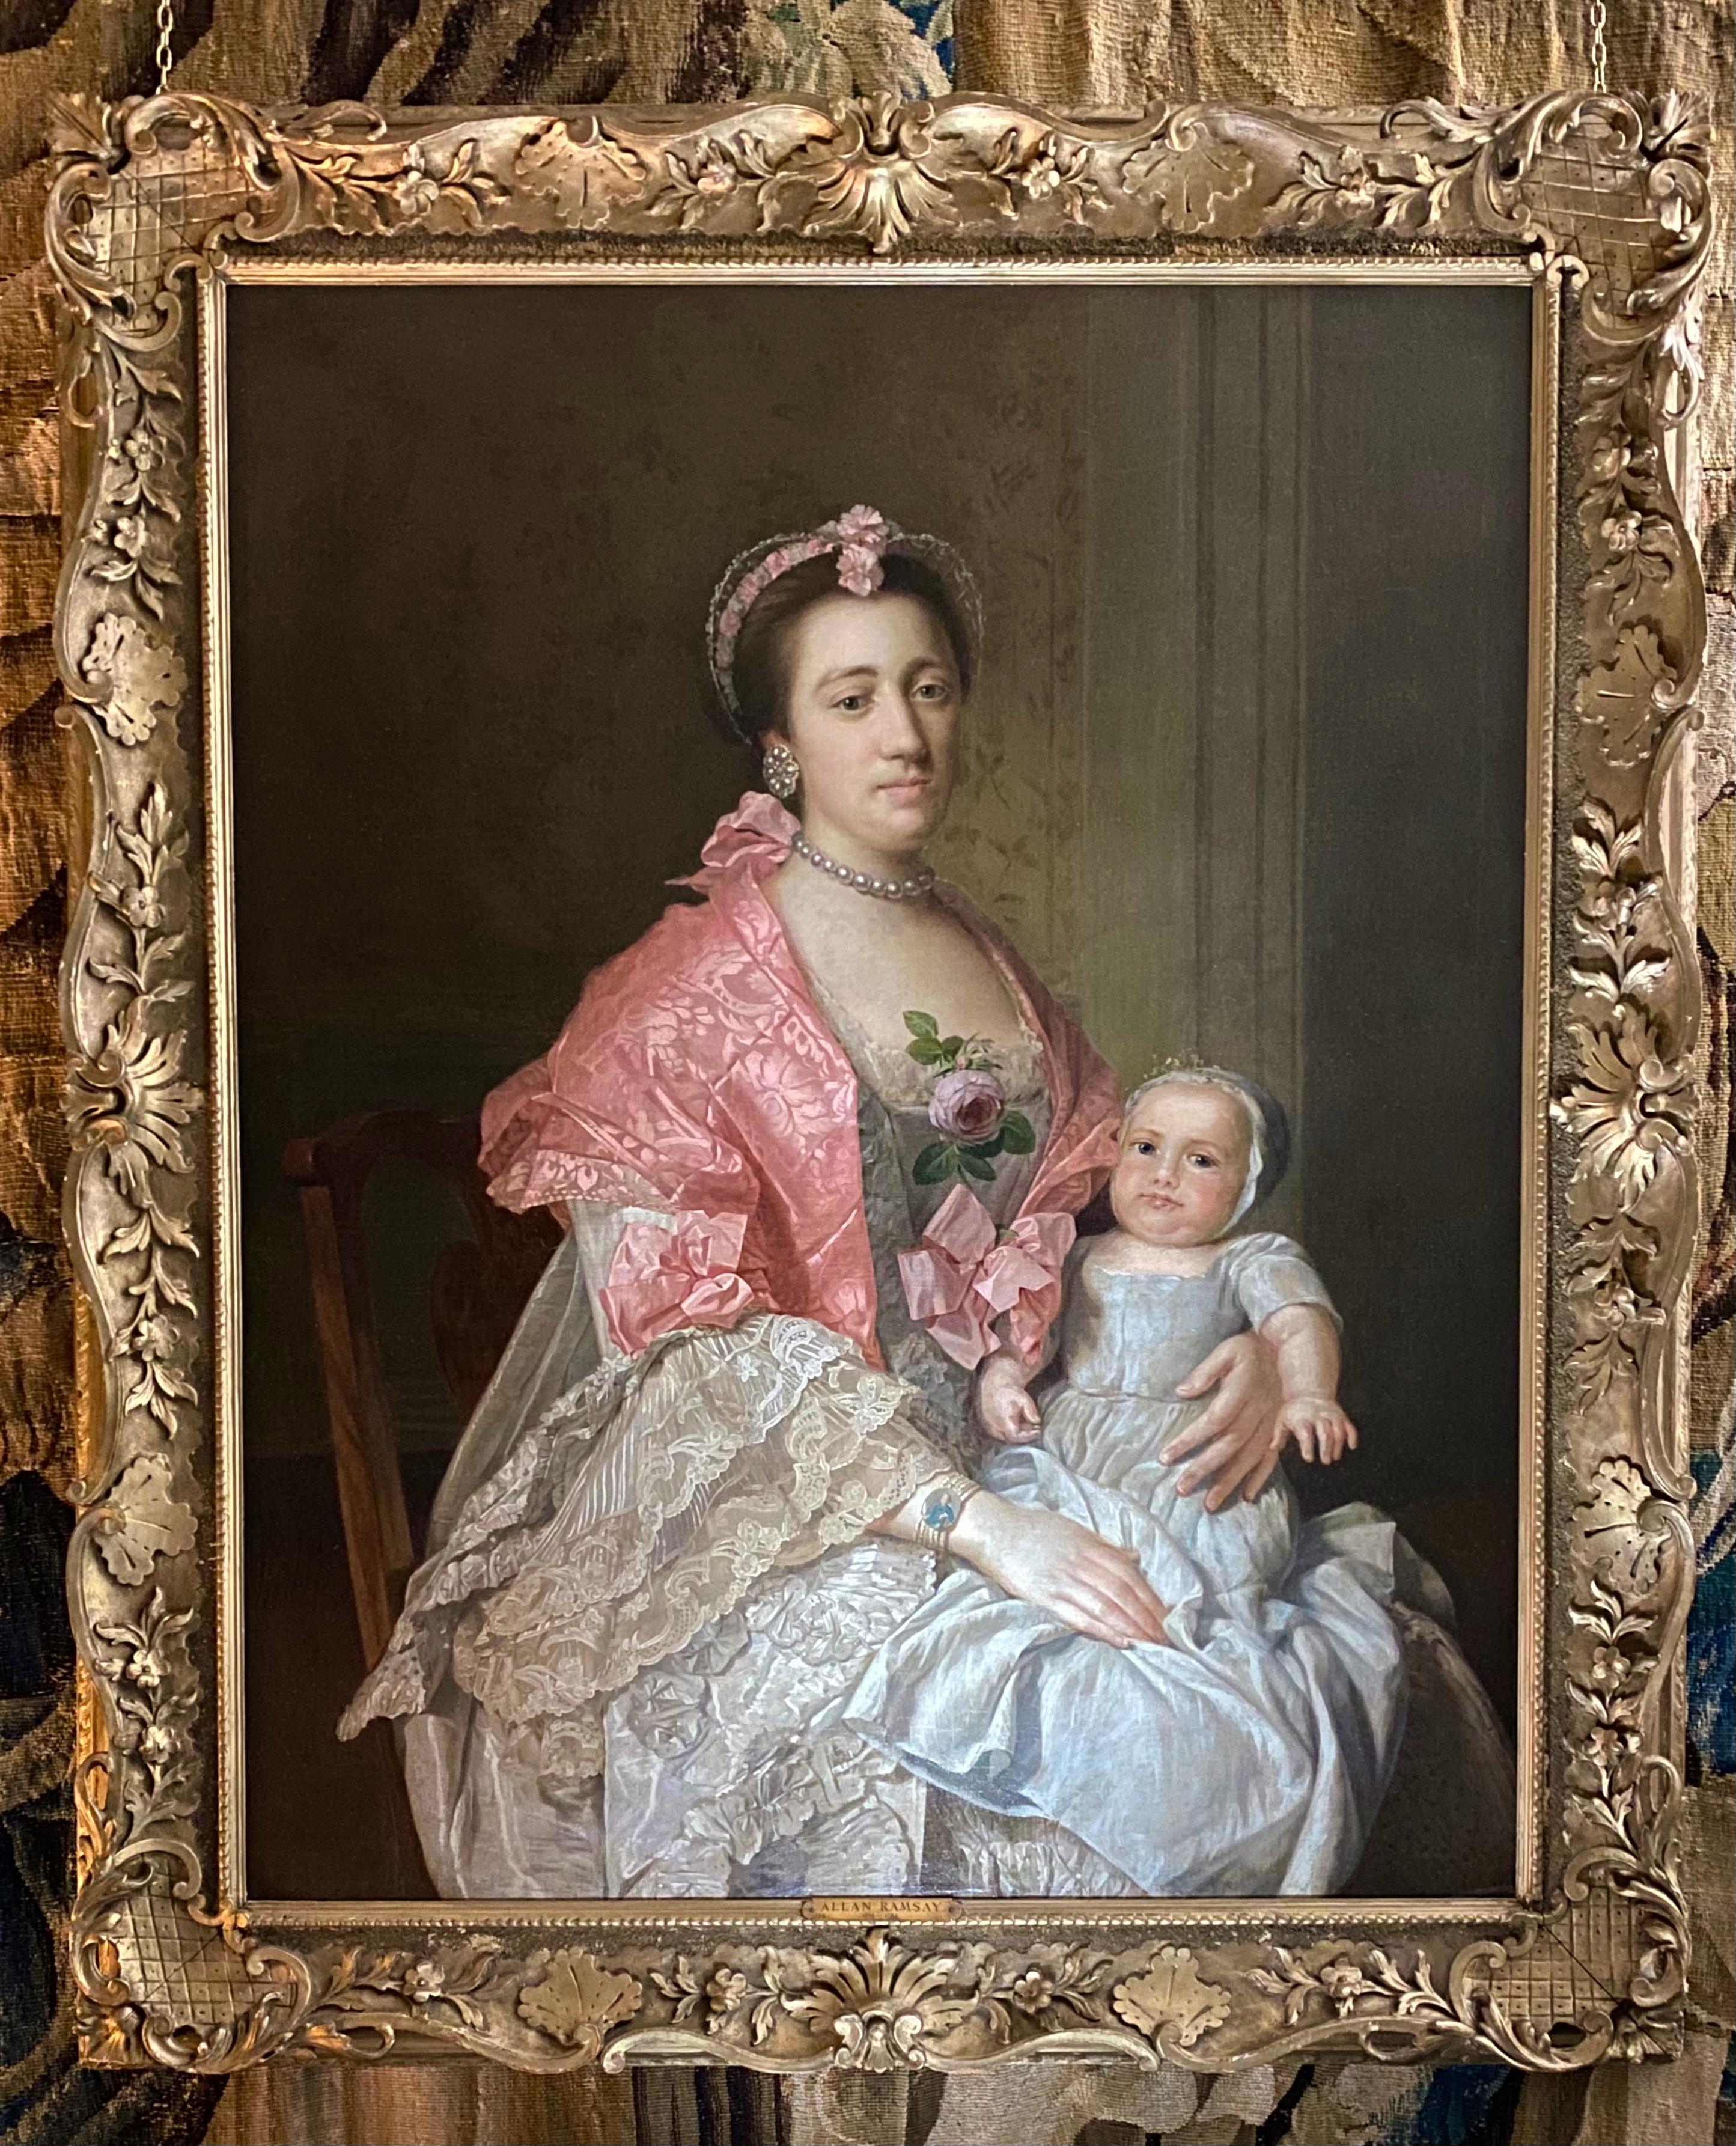 PORTRAIT OF A LADY AND HER CHILD c.1760 - BRITISH SCHOOL, STUDIO OF SIR ALLAN RAMSEY (1713-1784)
A particularly fine quality, 18th century English portrait of a beauty and her baby by an artist in the studio of Sir Alan Ramsey.  The attractive and